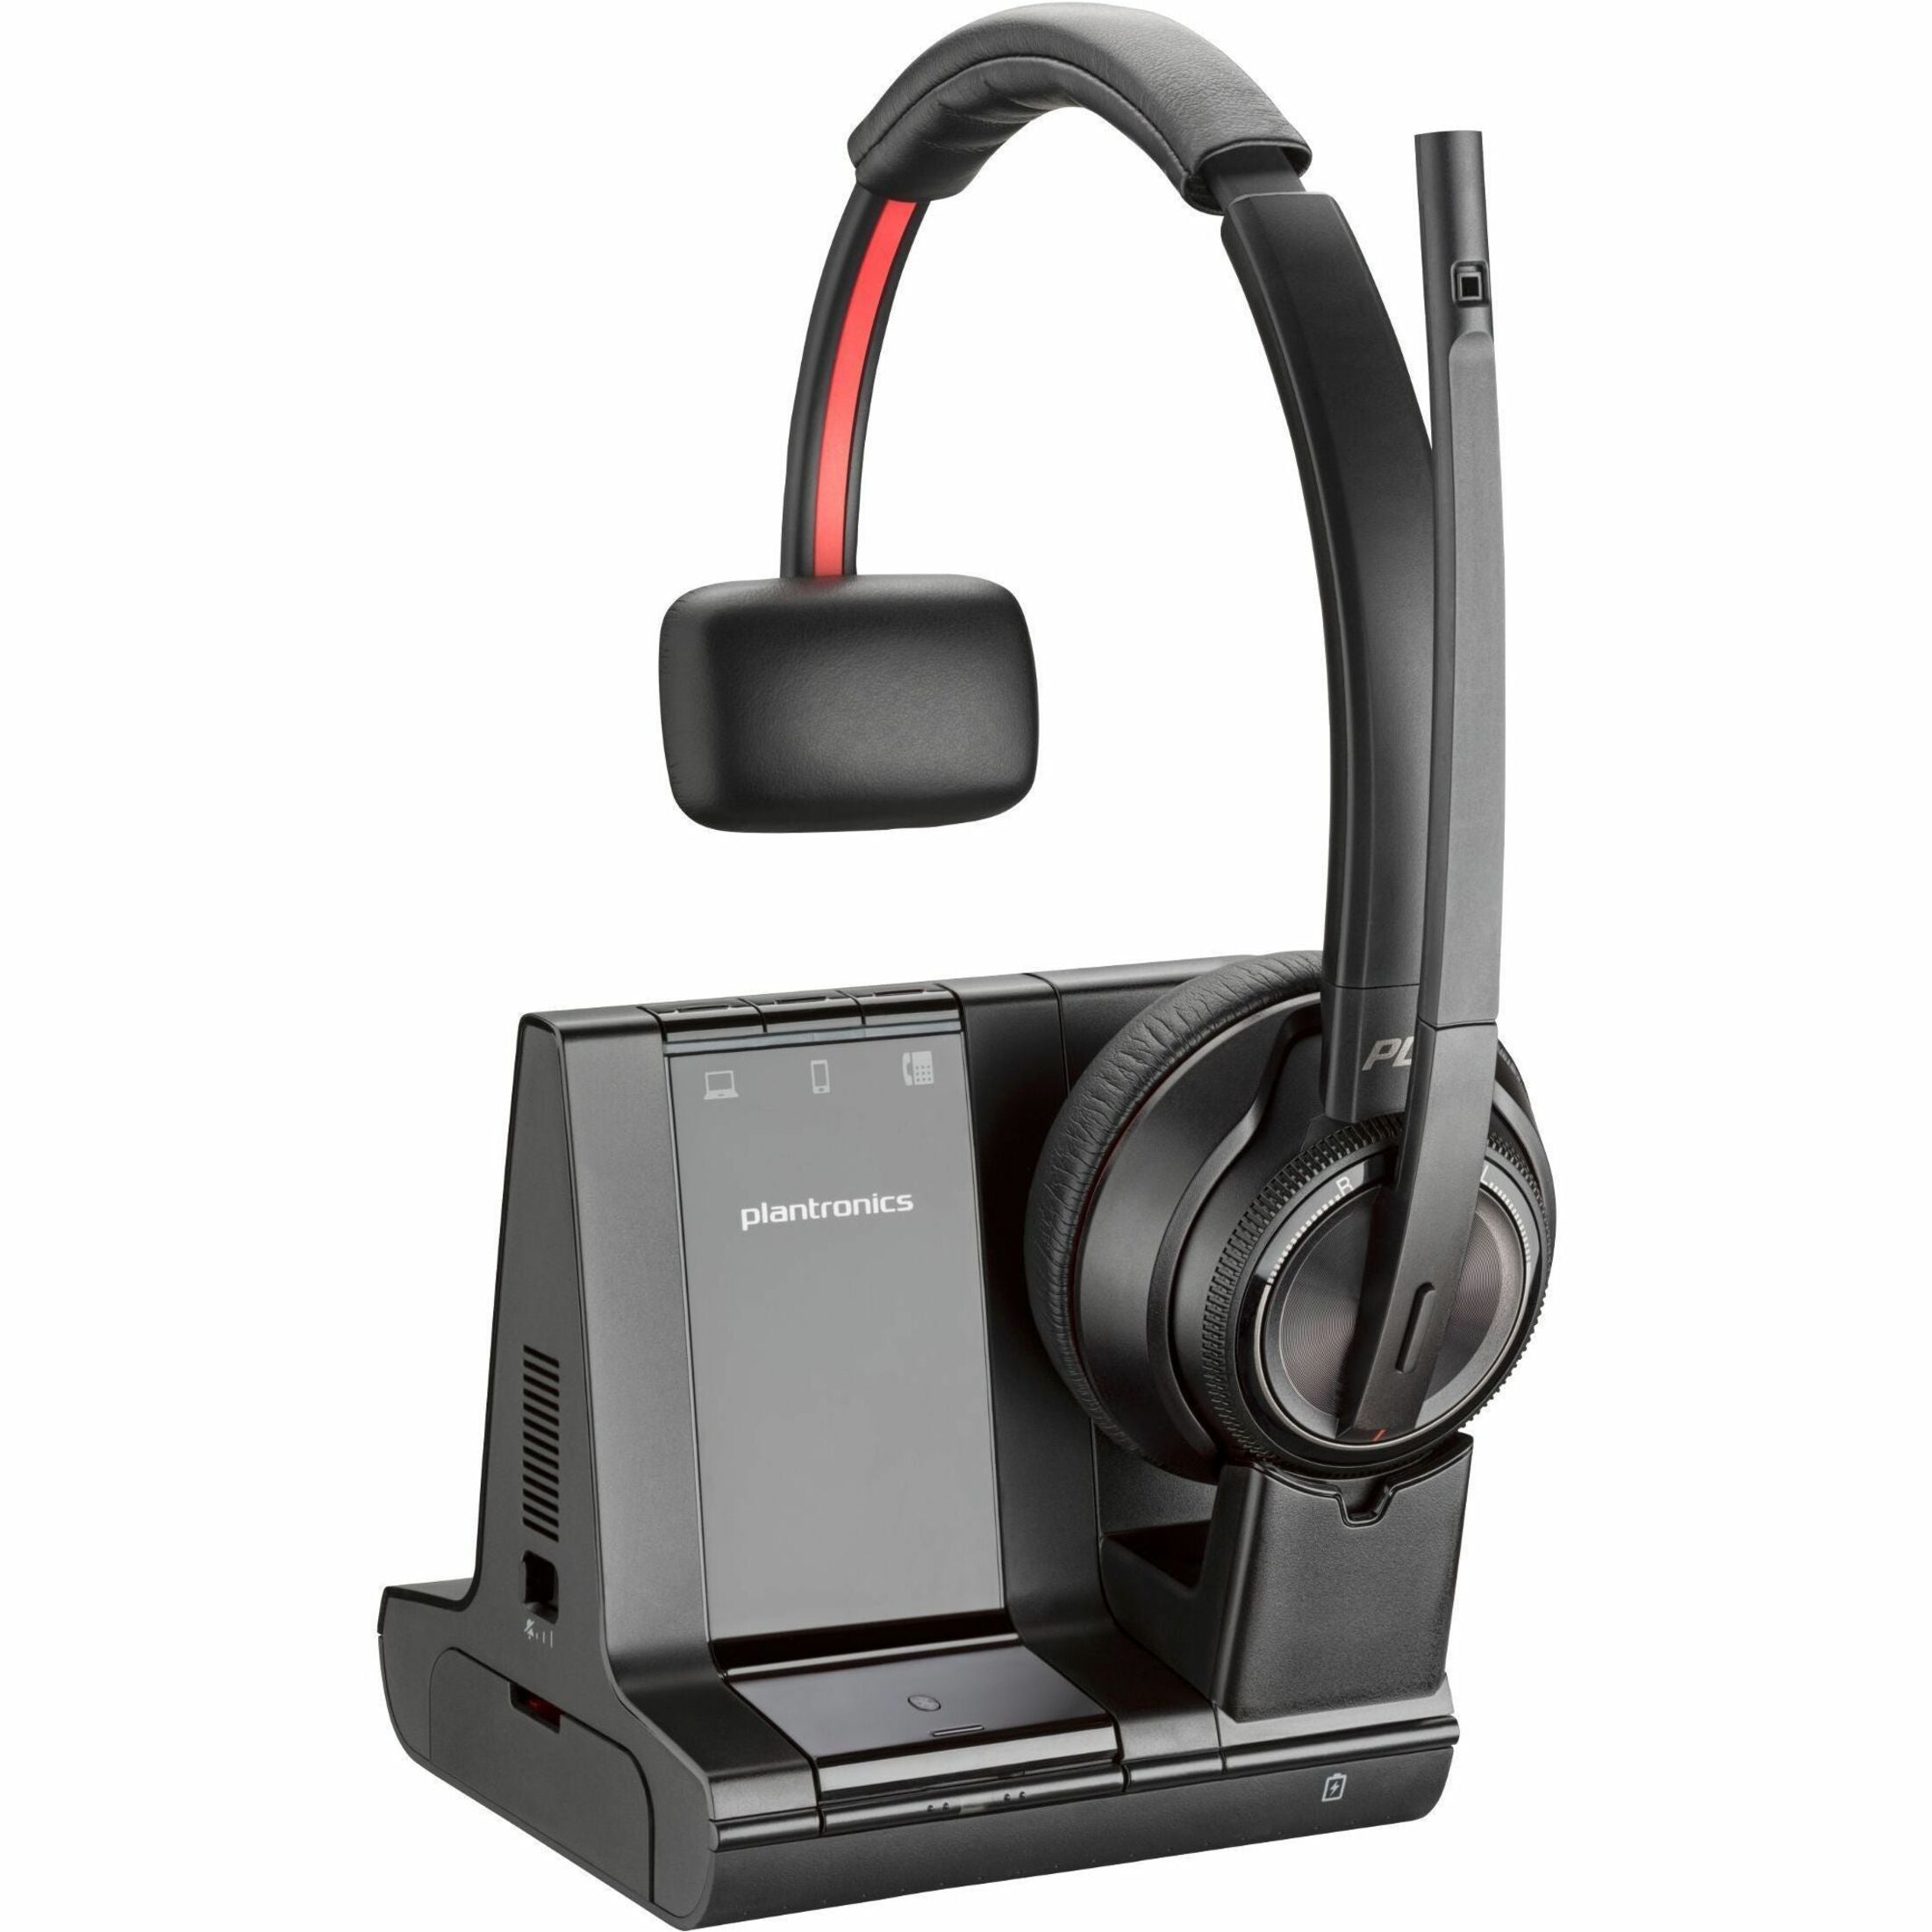 Poly Savi 8210 UC Microsoft Teams Certified DECT 1920-1930 MHz USB-A Headset, Wireless On-ear Over-the-head Headset with Boom Microphone, Black